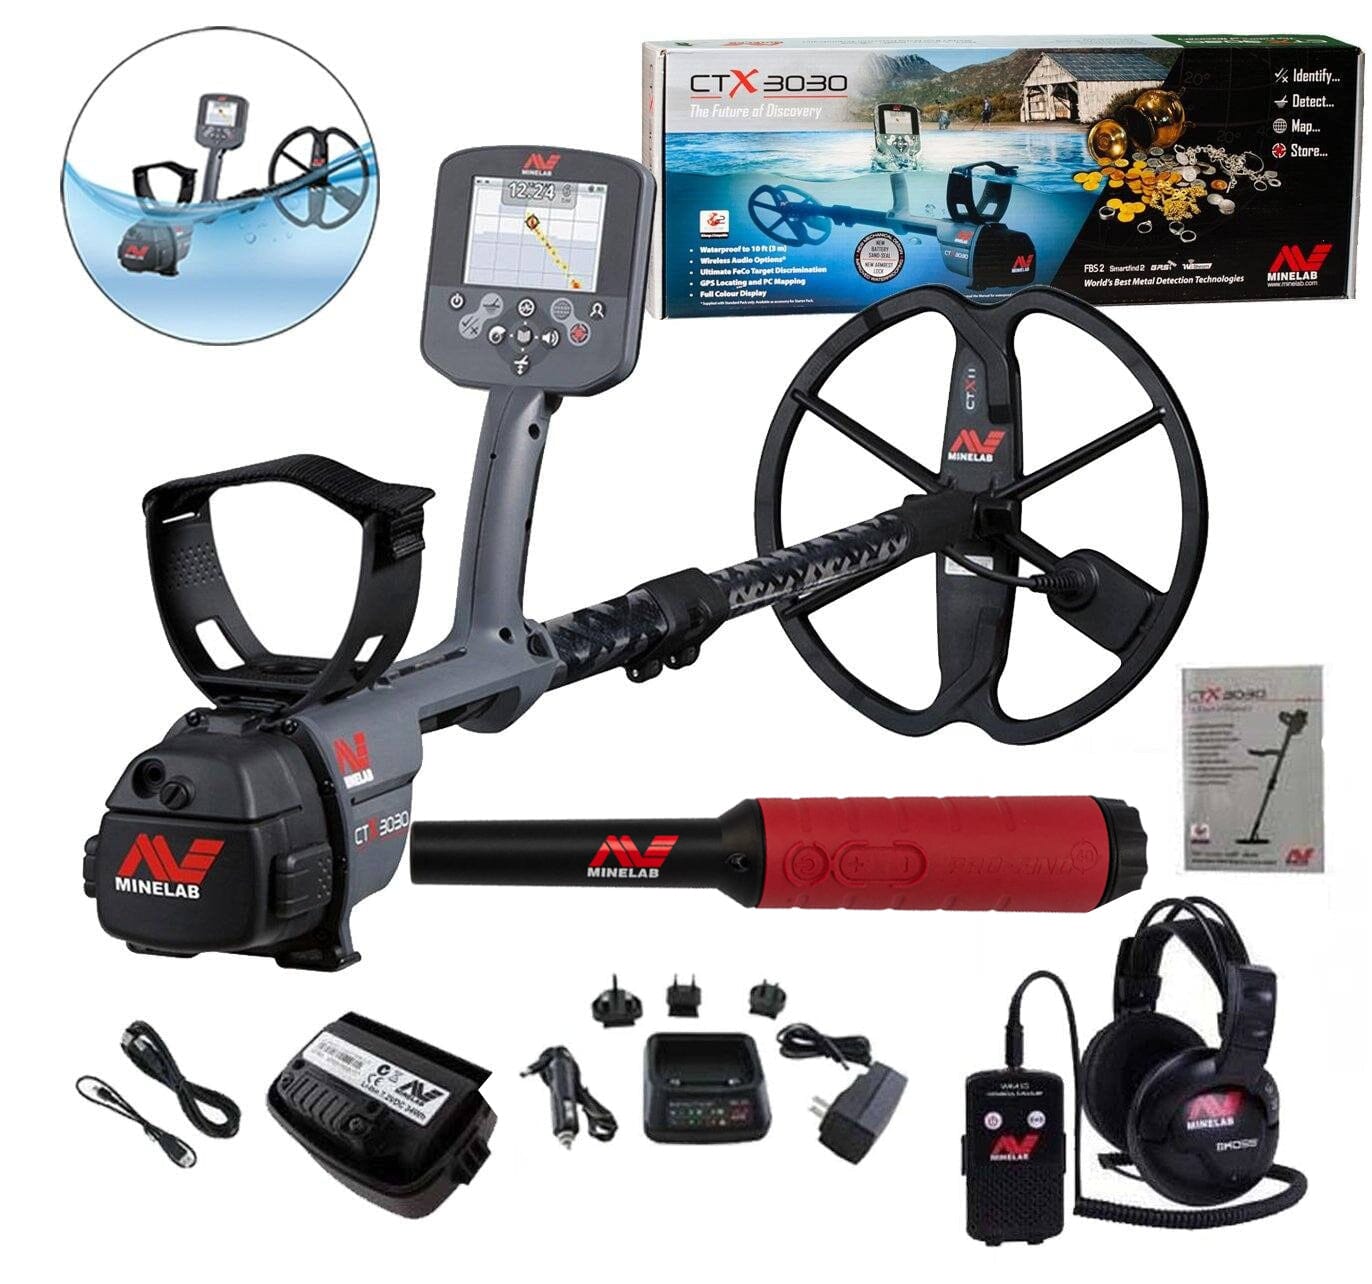 Minelab CTX 3030 Waterproof Metal Detector and FREE Pro-Find 40 Pinpointer, Extra Gear